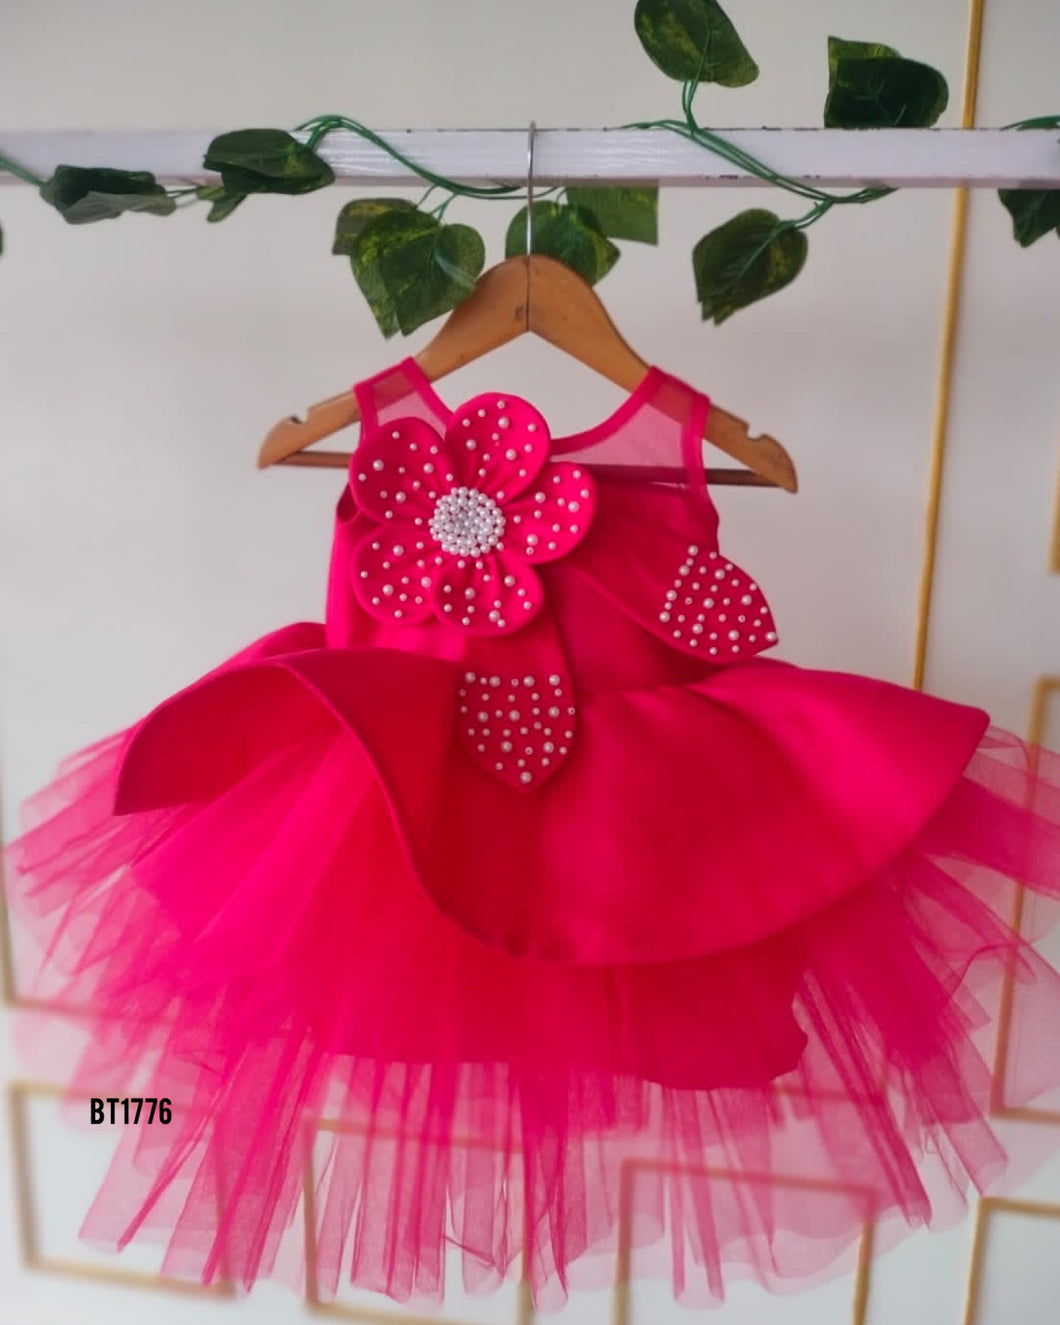 BT1776  Fuchsia Bloom Party Frock - Your Little One's Dream Come True!